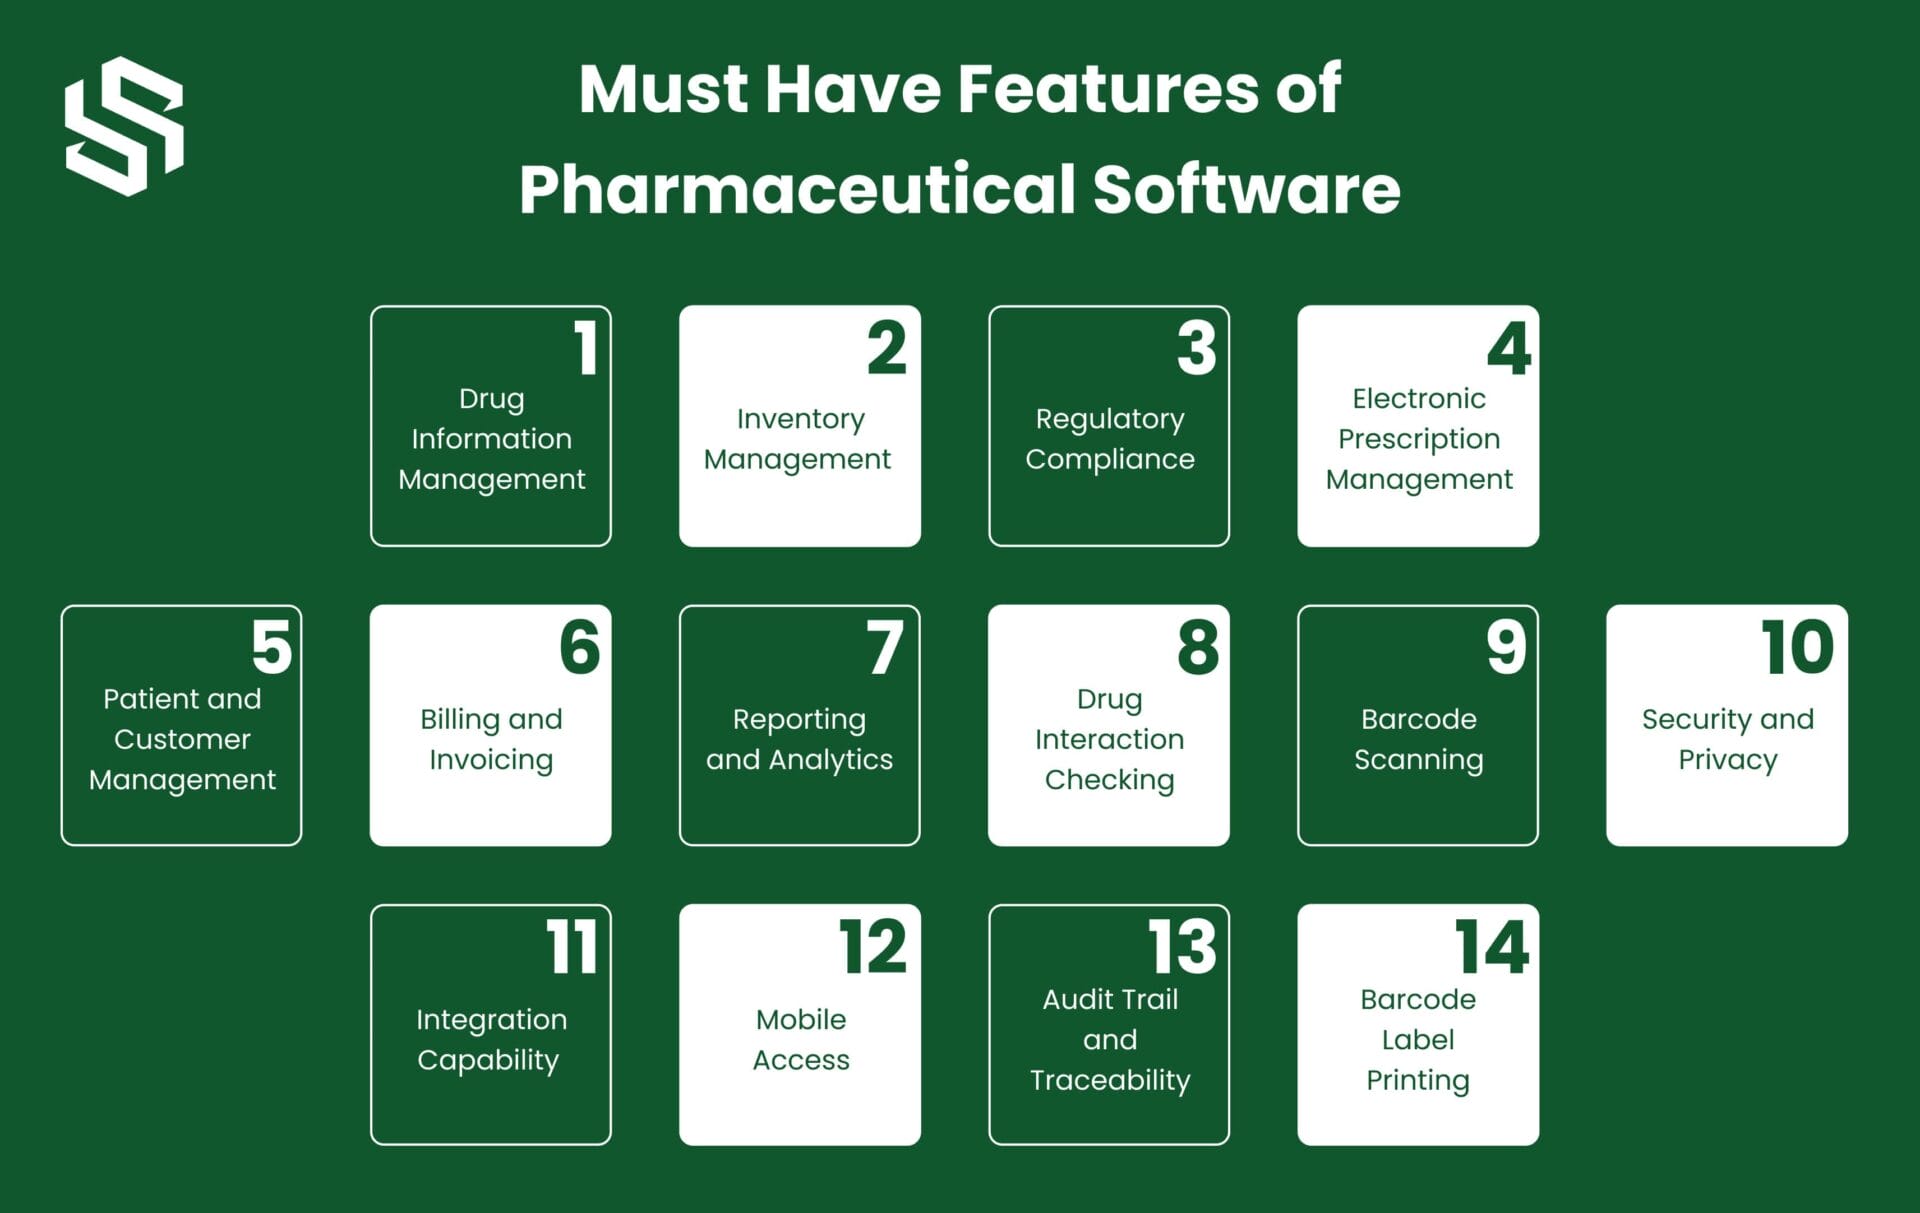 Must Have Features of Pharmaceutical Software